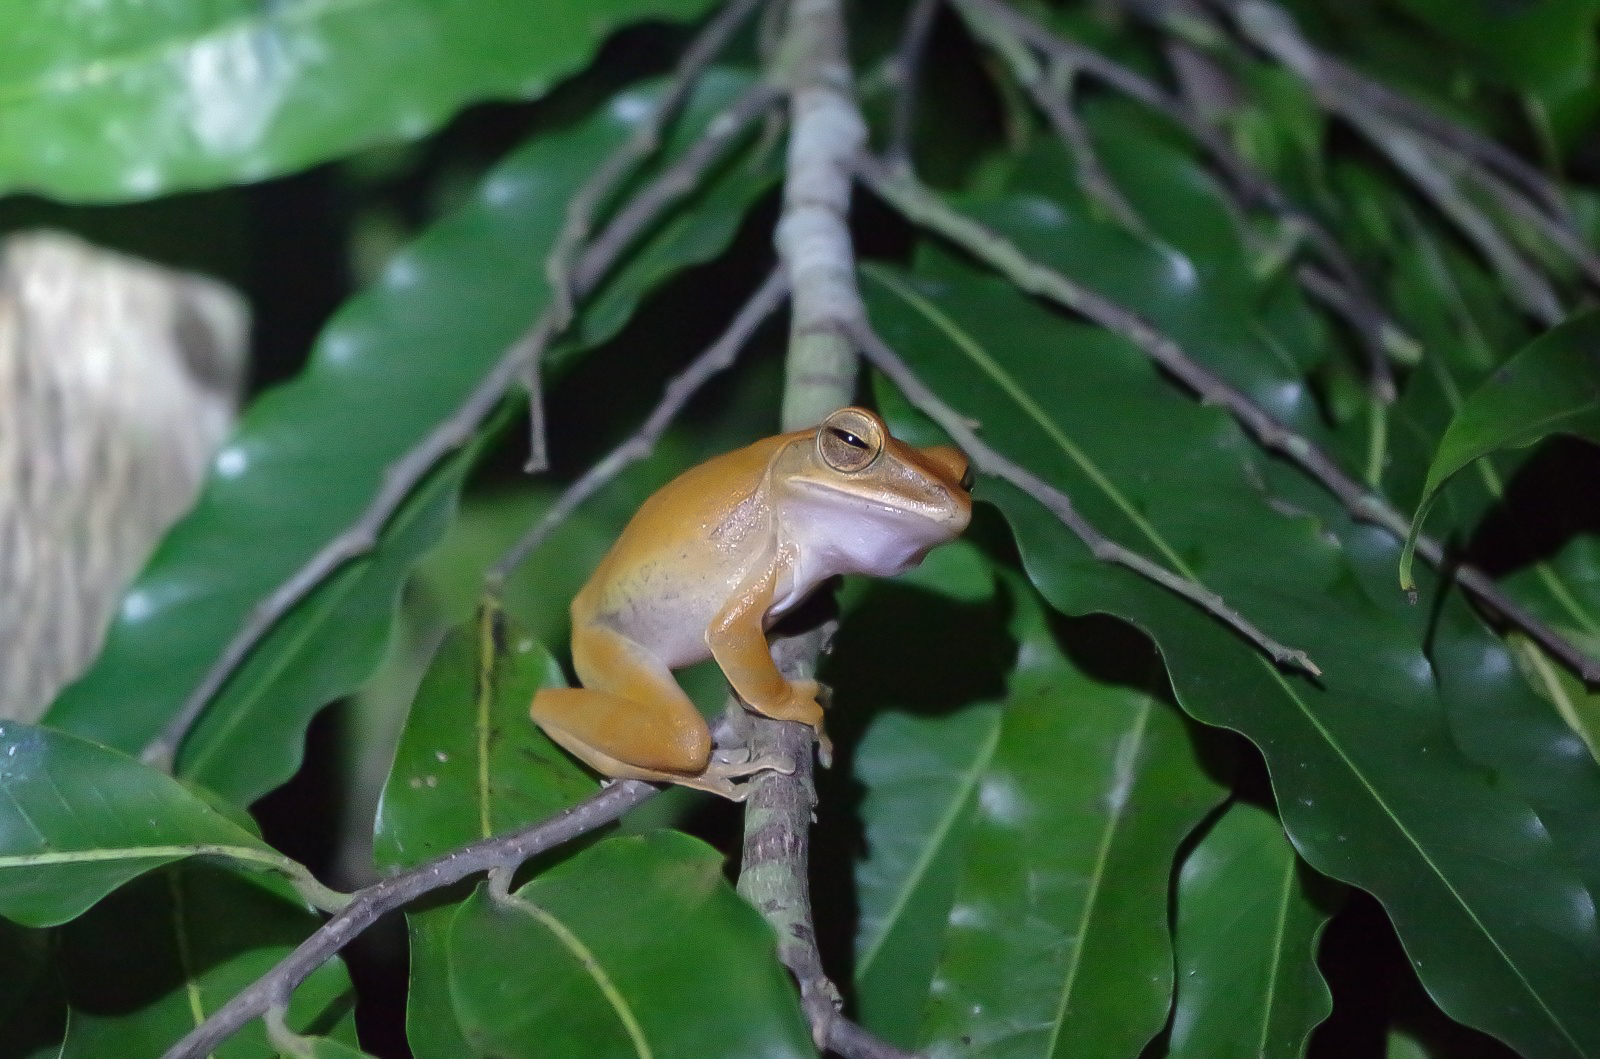 Four-lined tree frog